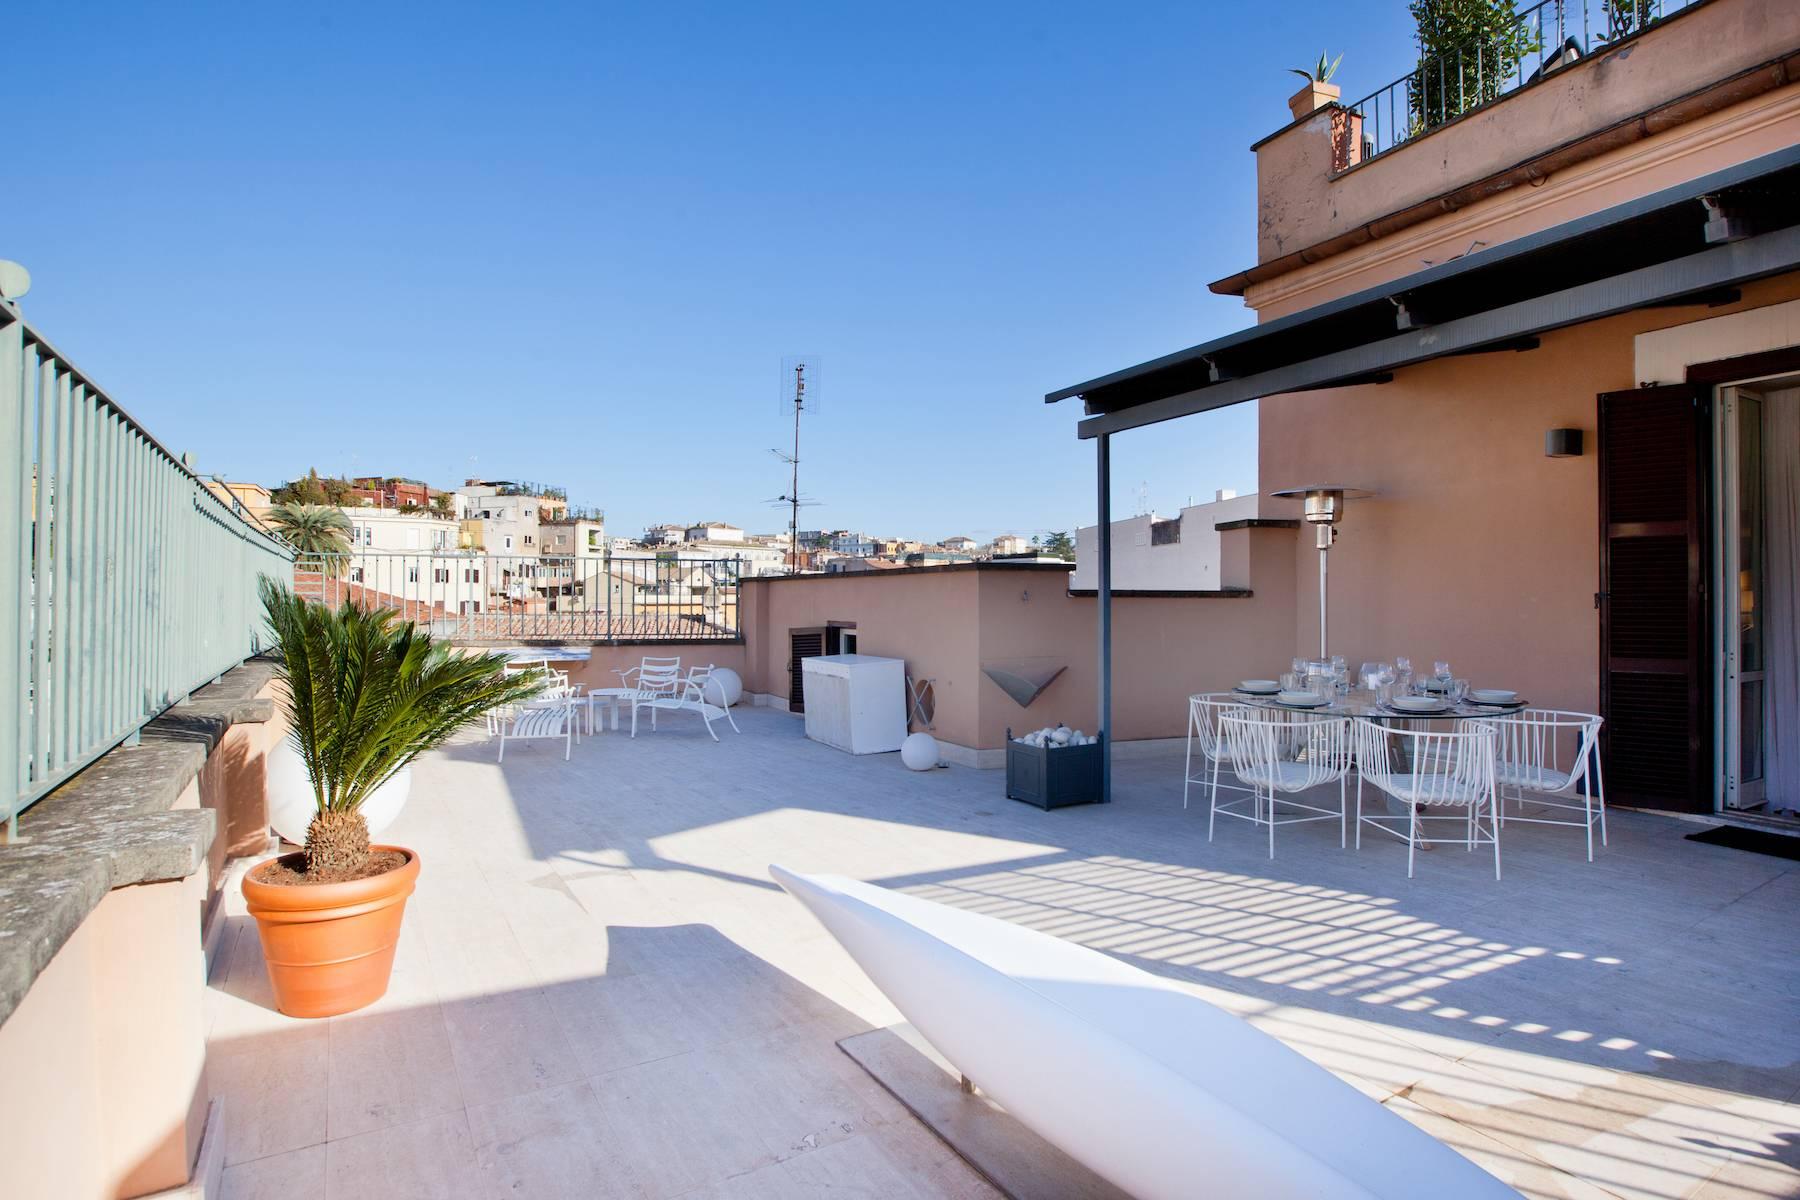 Charming penthouse located few steps from Piazza di Spagna - 2